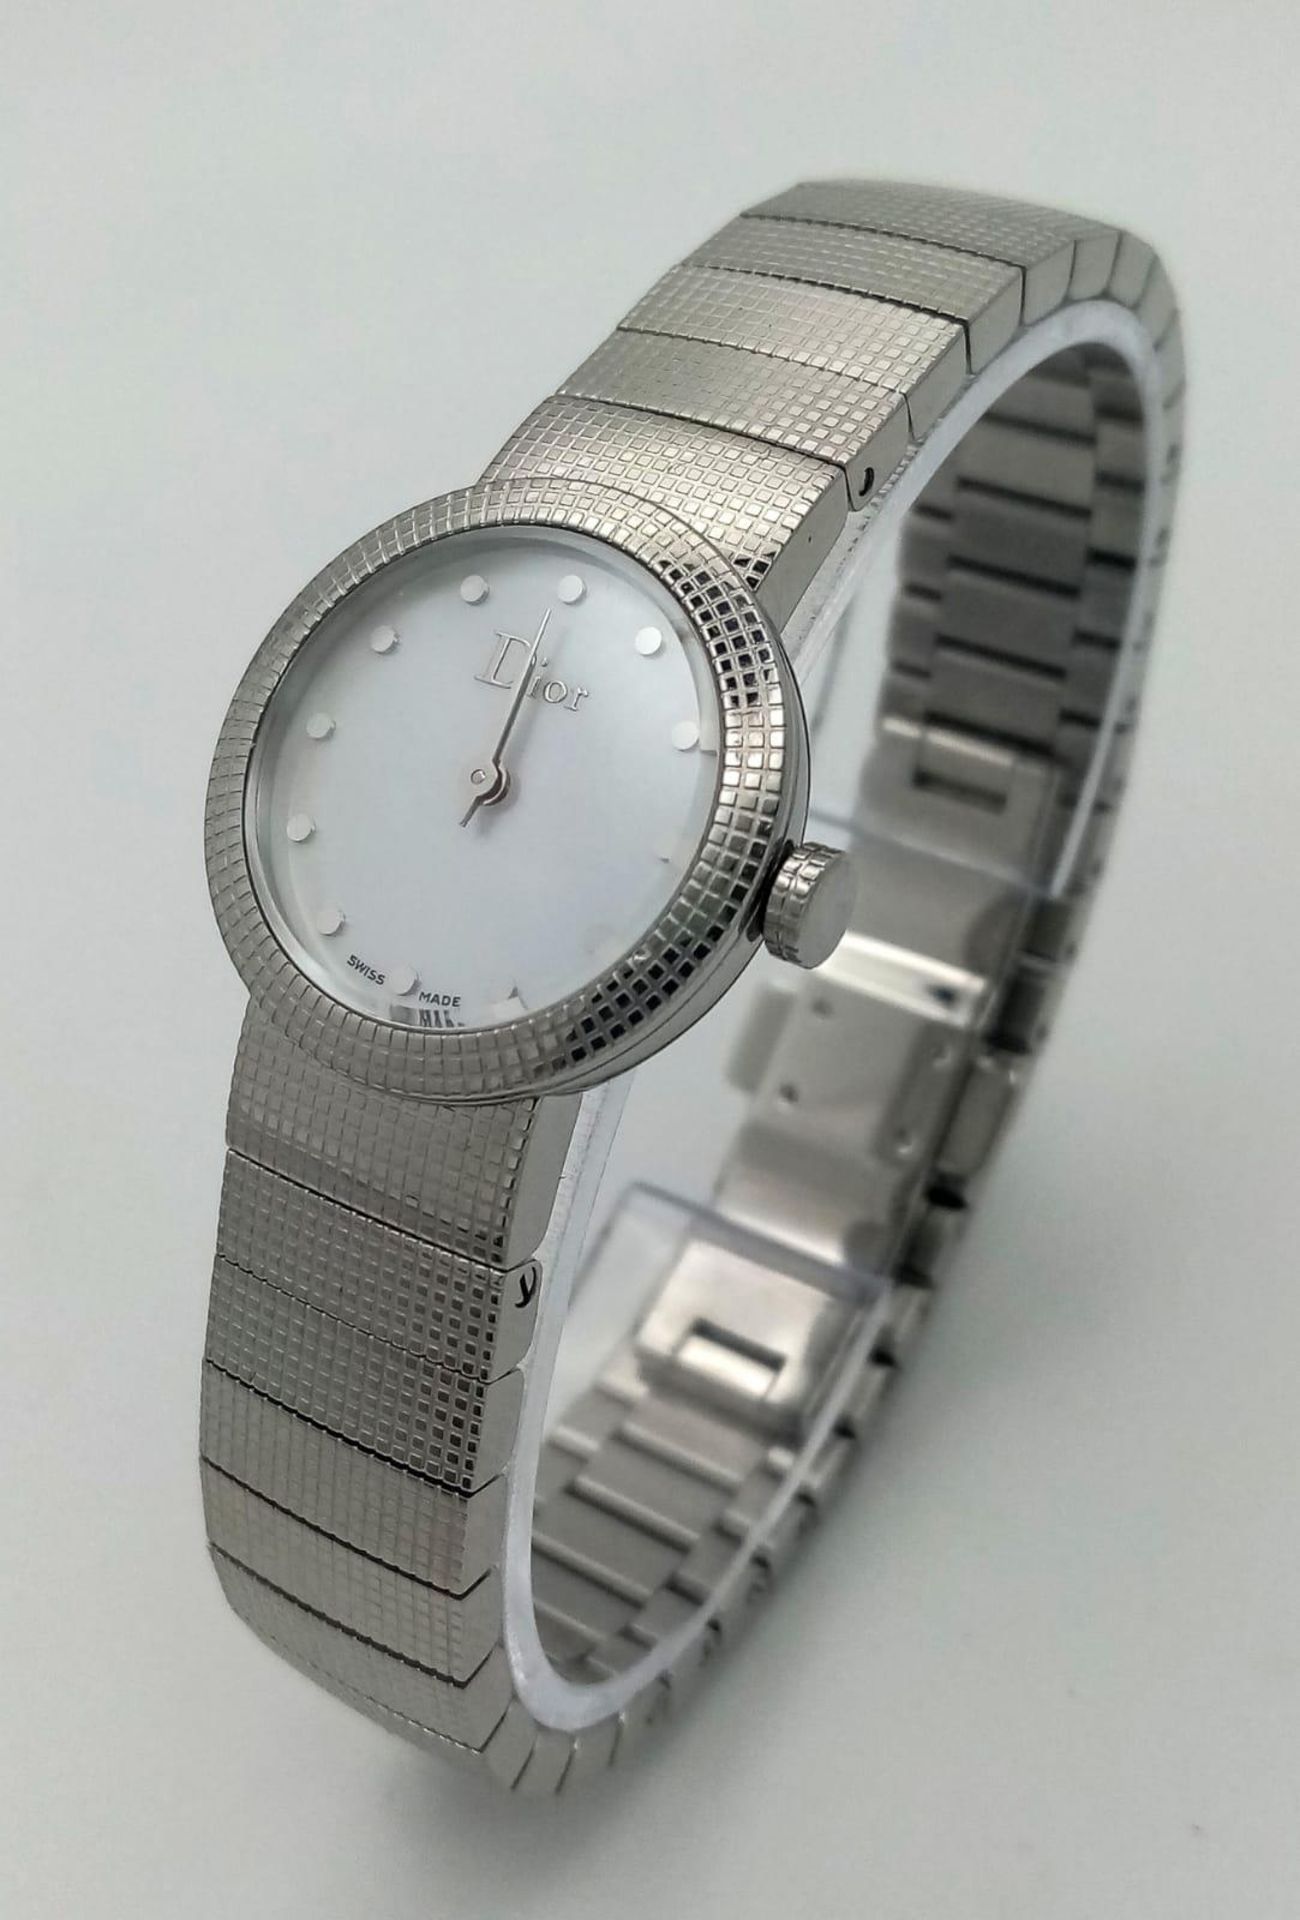 A Designer Christian Dior Quartz Ladies Watch. Stainless steel bracelet and case - 23mm. White dial. - Image 4 of 10